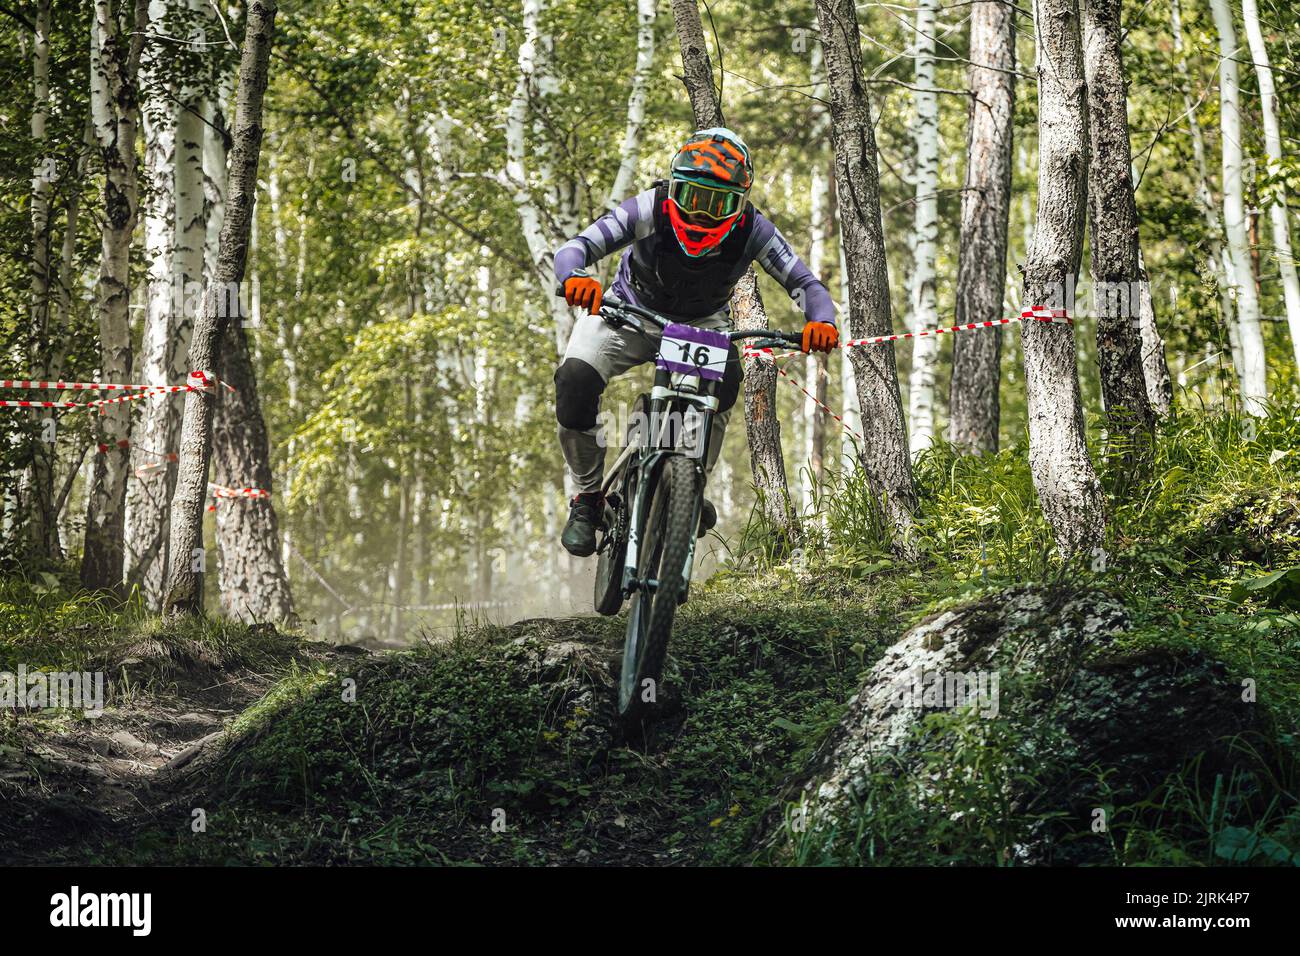 athlete rider riding forest trail in downhill race Stock Photo